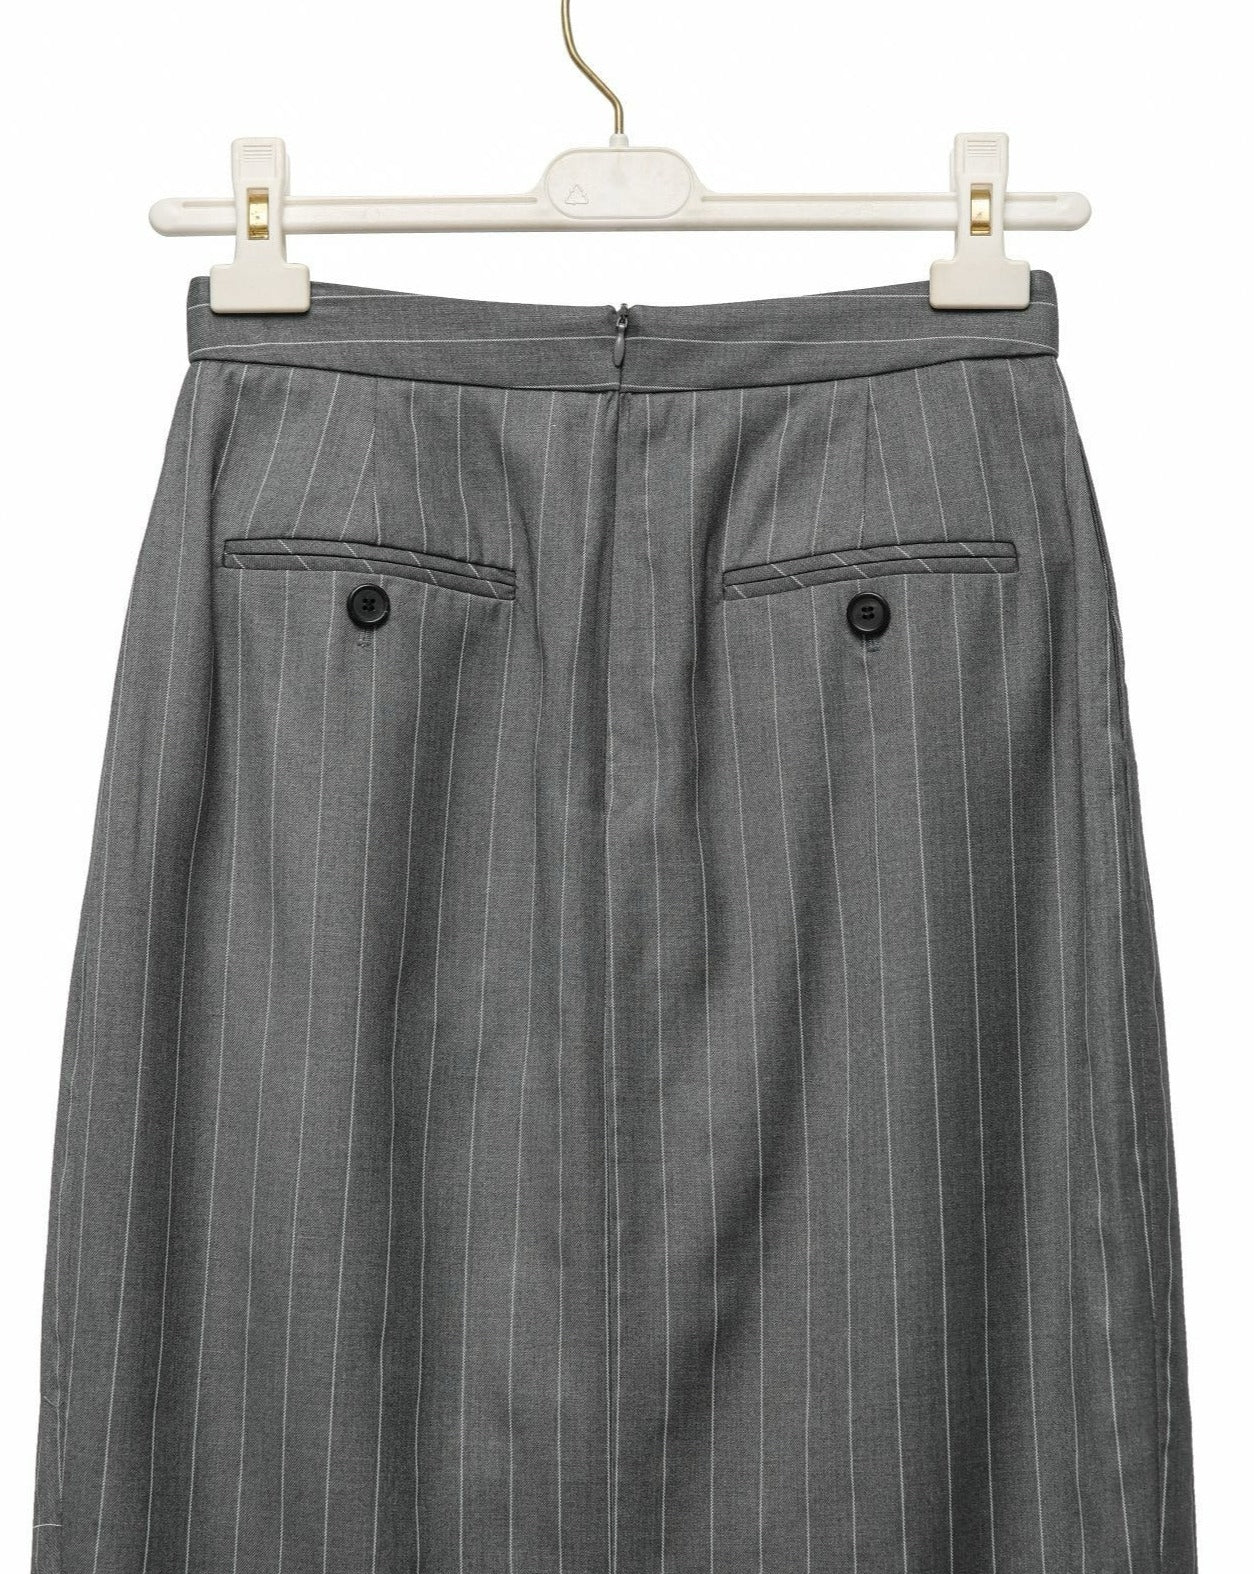 【PAPERMOON 페이퍼 문】SS / Wide Pin Stripe Set Up Suit Pencil Midi Skirt